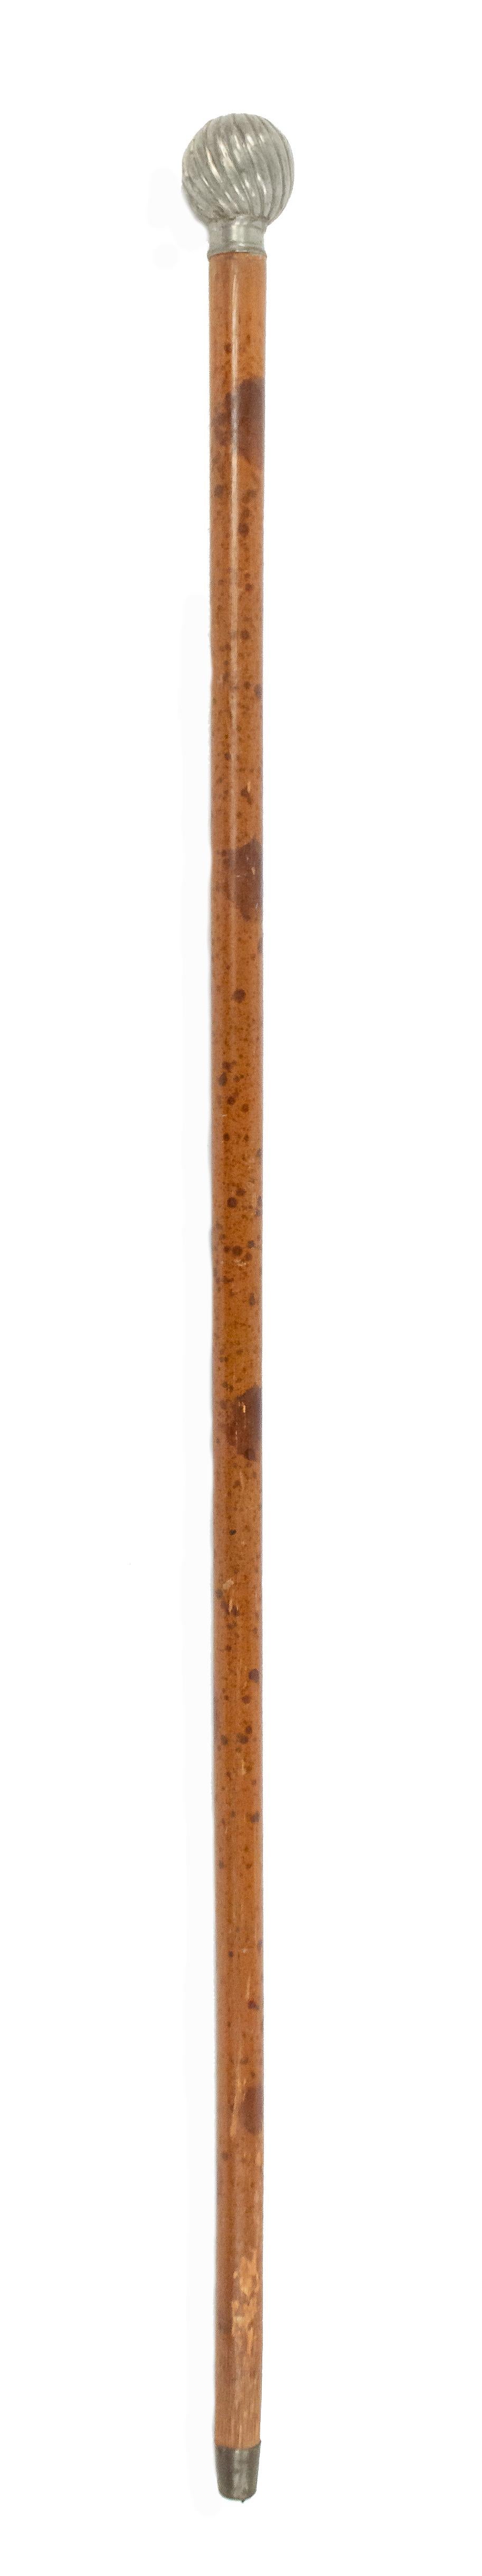 19th Century English Victorian Wood and Pewter Cane For Sale